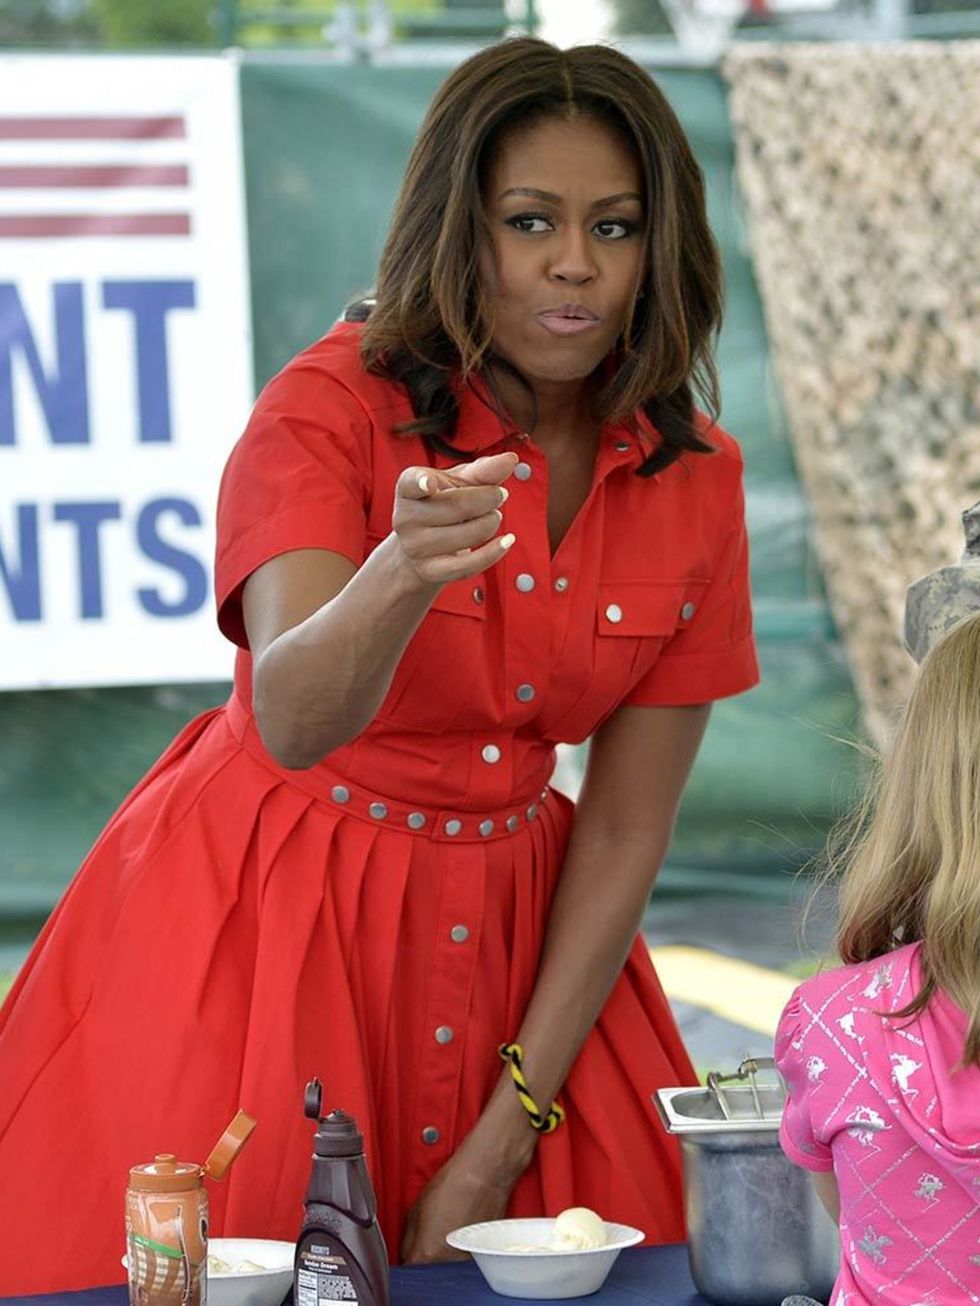 Michelle Obama distributes food to people at the United States and Nato military base in Aviano, Italy, June 2015.